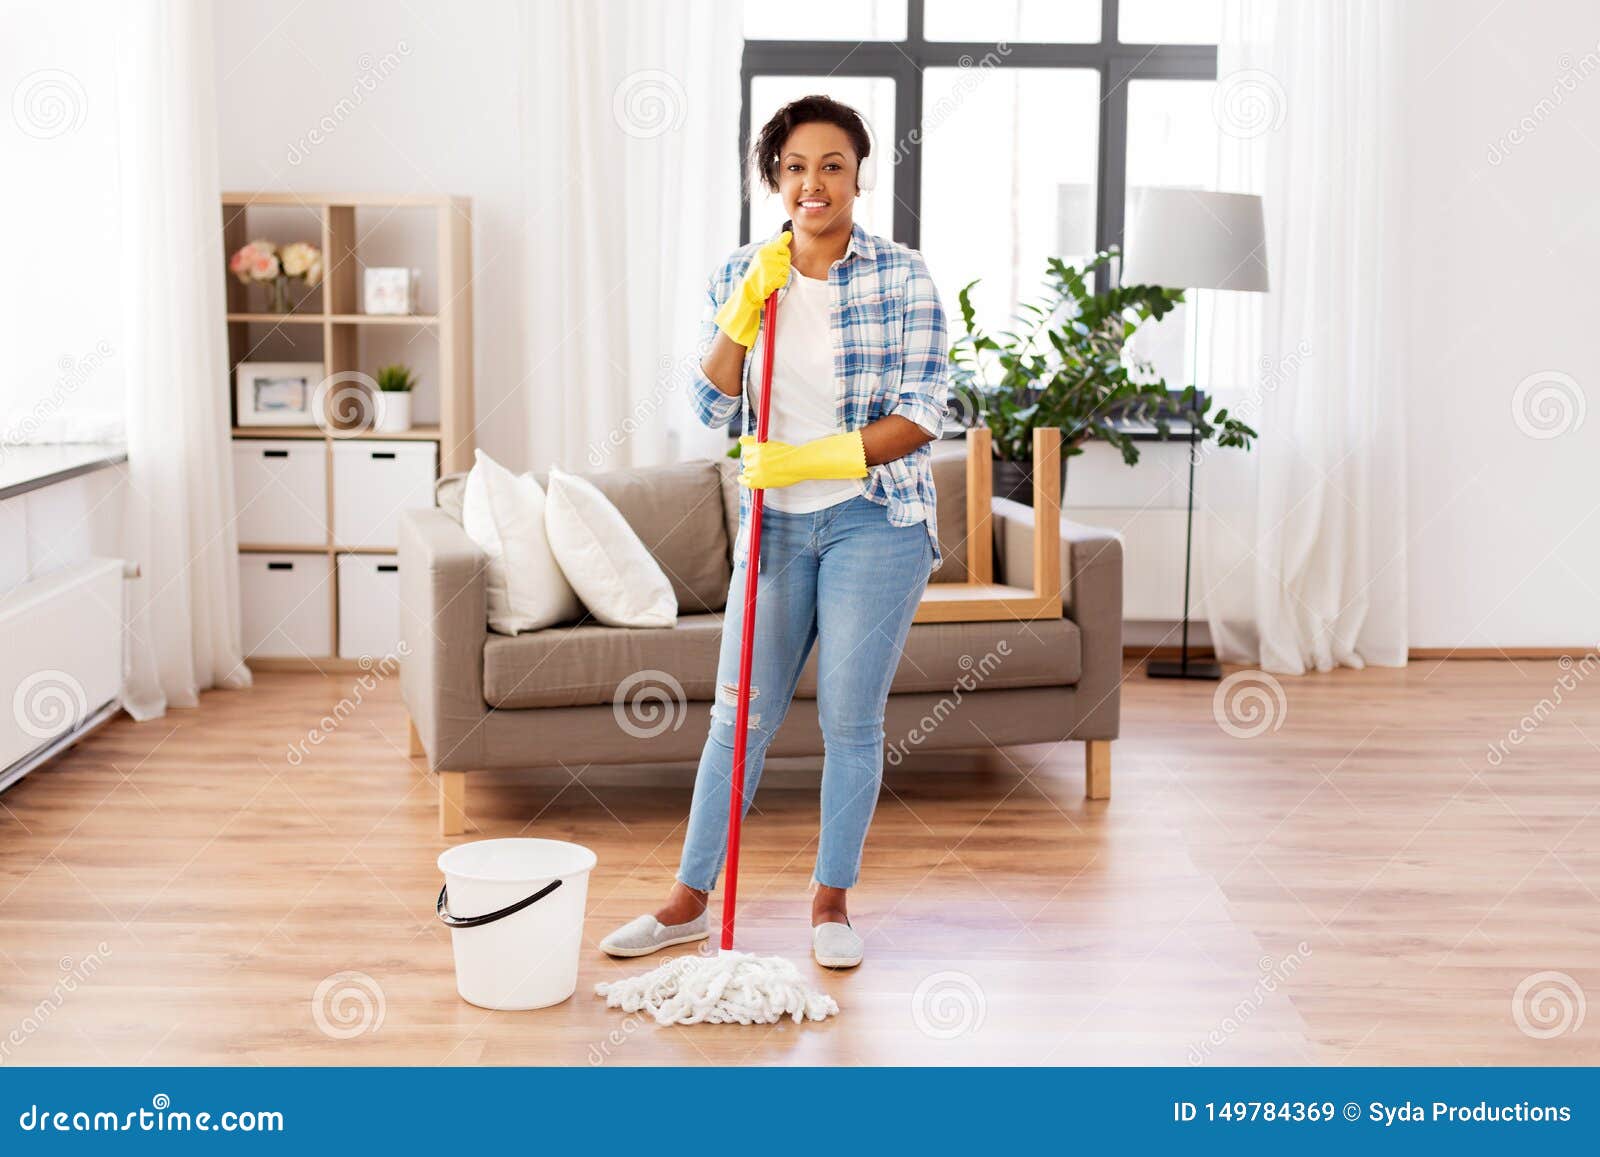 African Woman Or Housewife Cleaning Floor At Home Stock Image Image